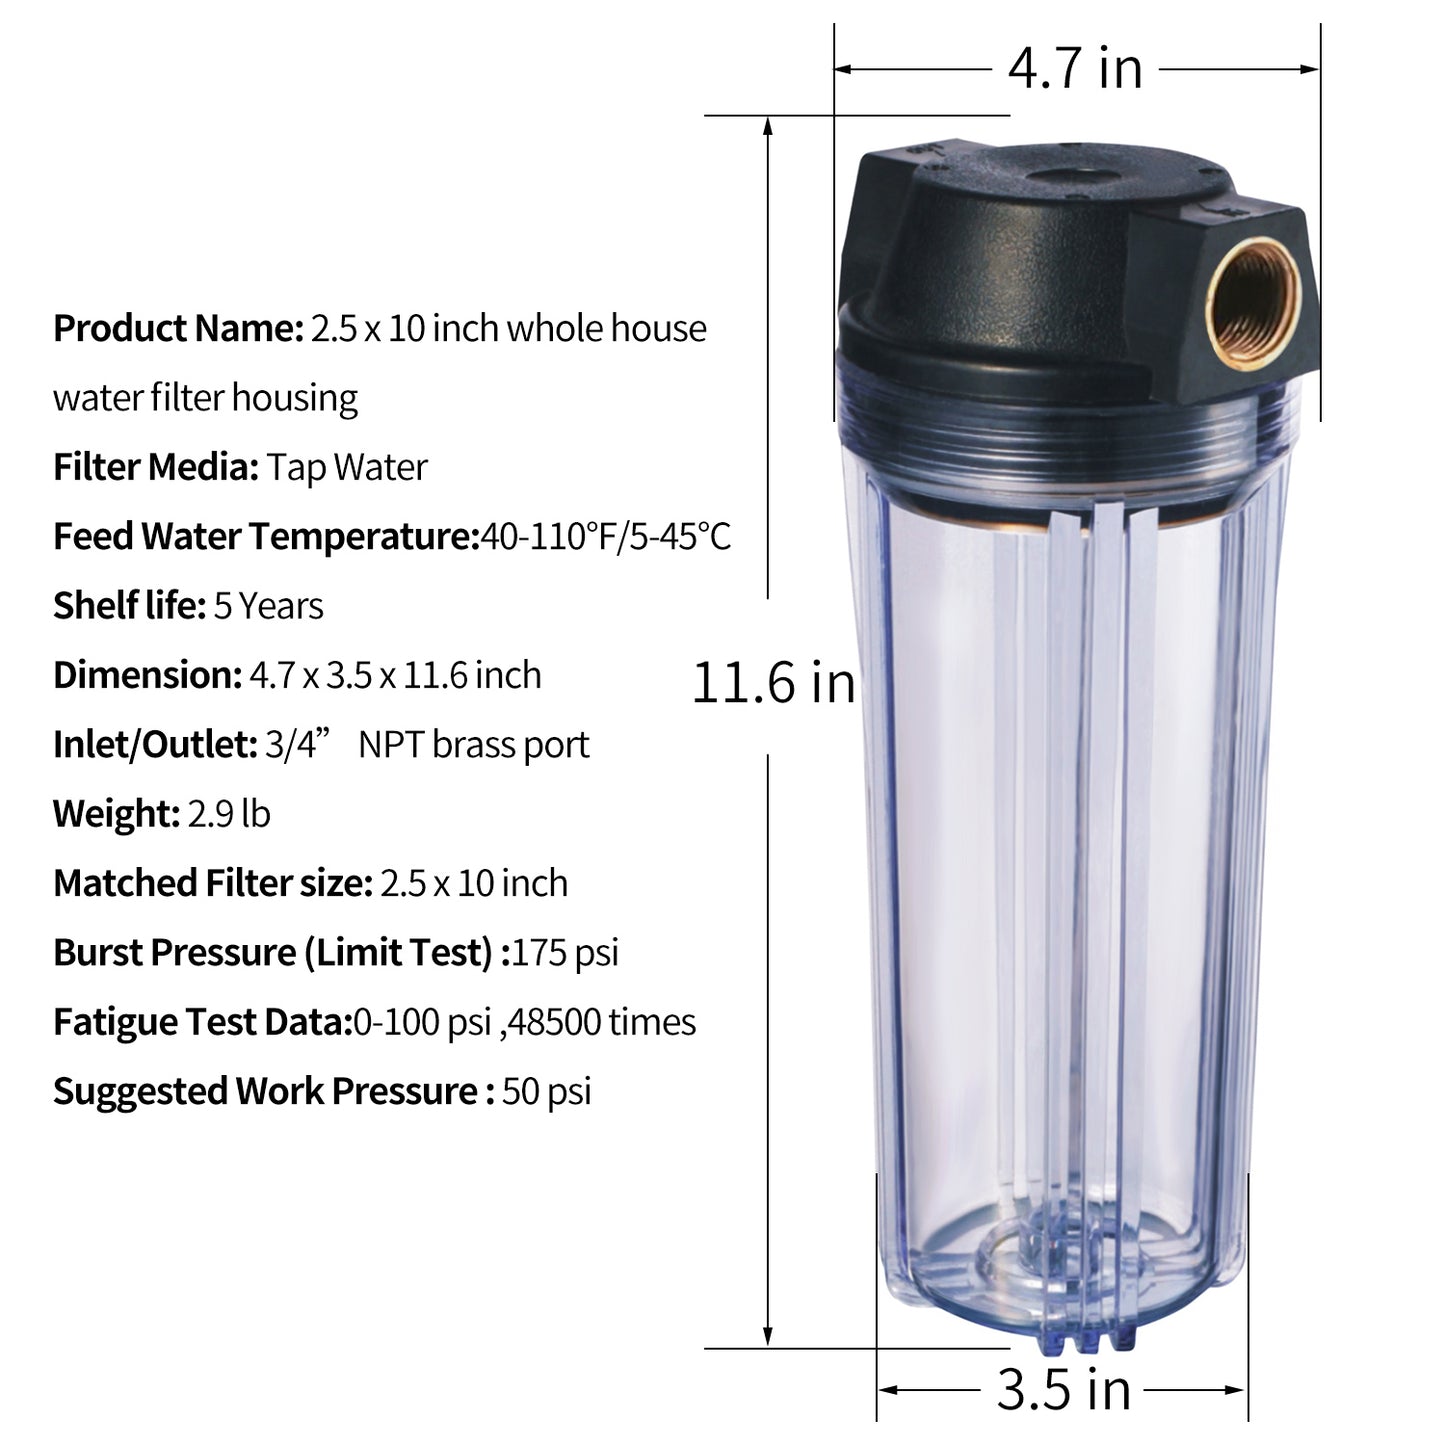 10-Inch Clear Water FilterHousing-3/4"Port-Fit for 2.5" x 10" Filters